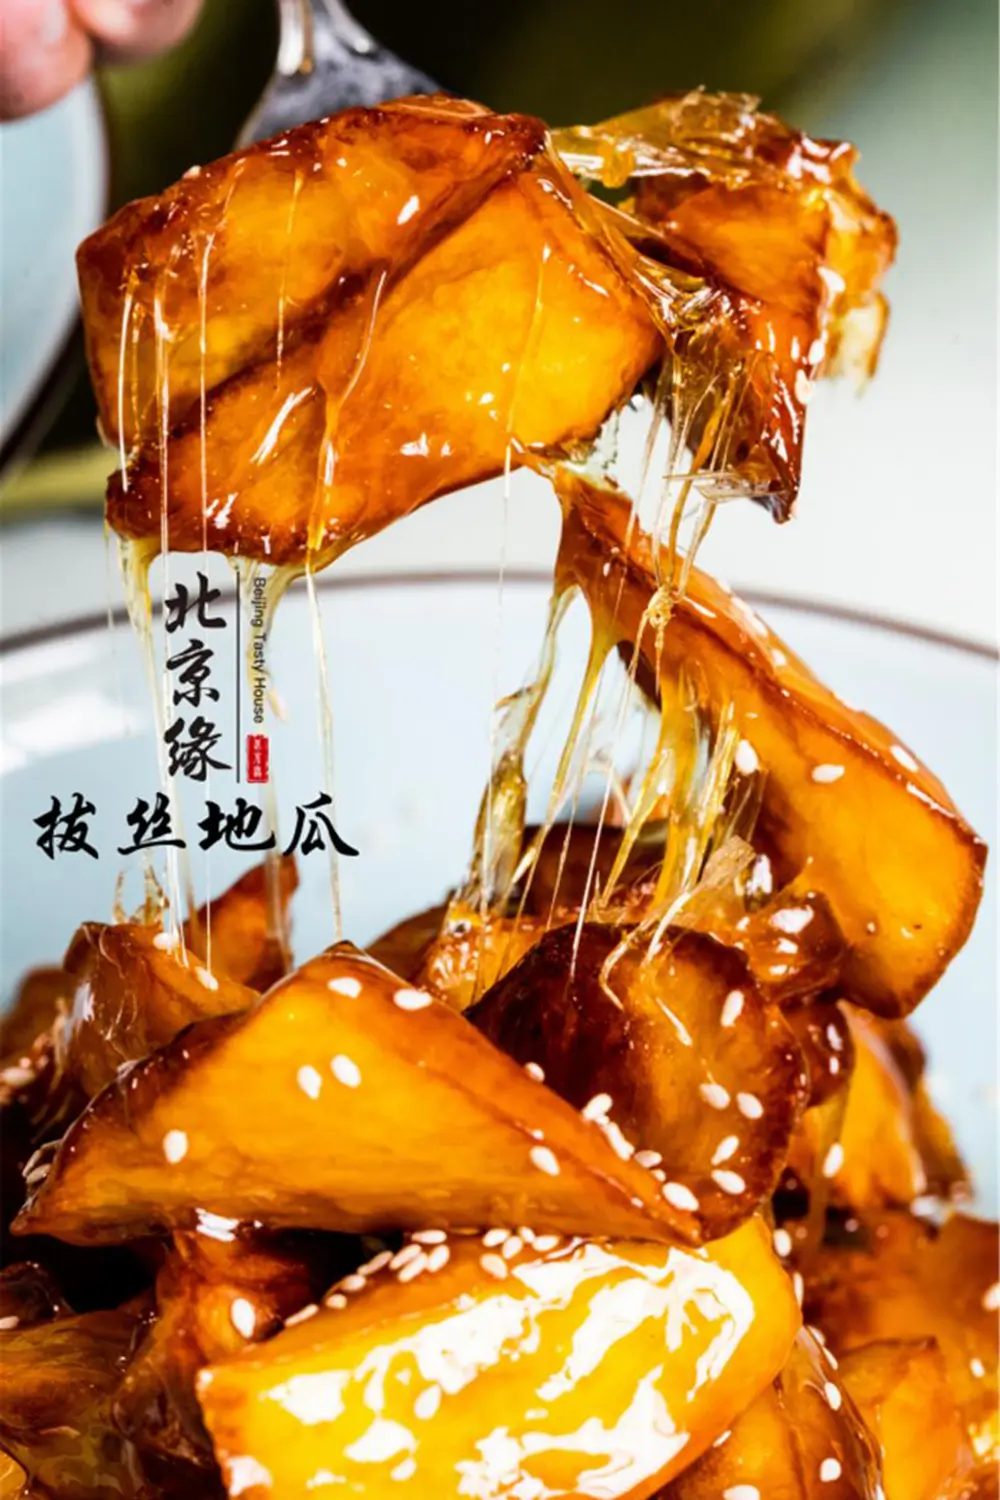 Candied sweet potatoes 拔丝地瓜